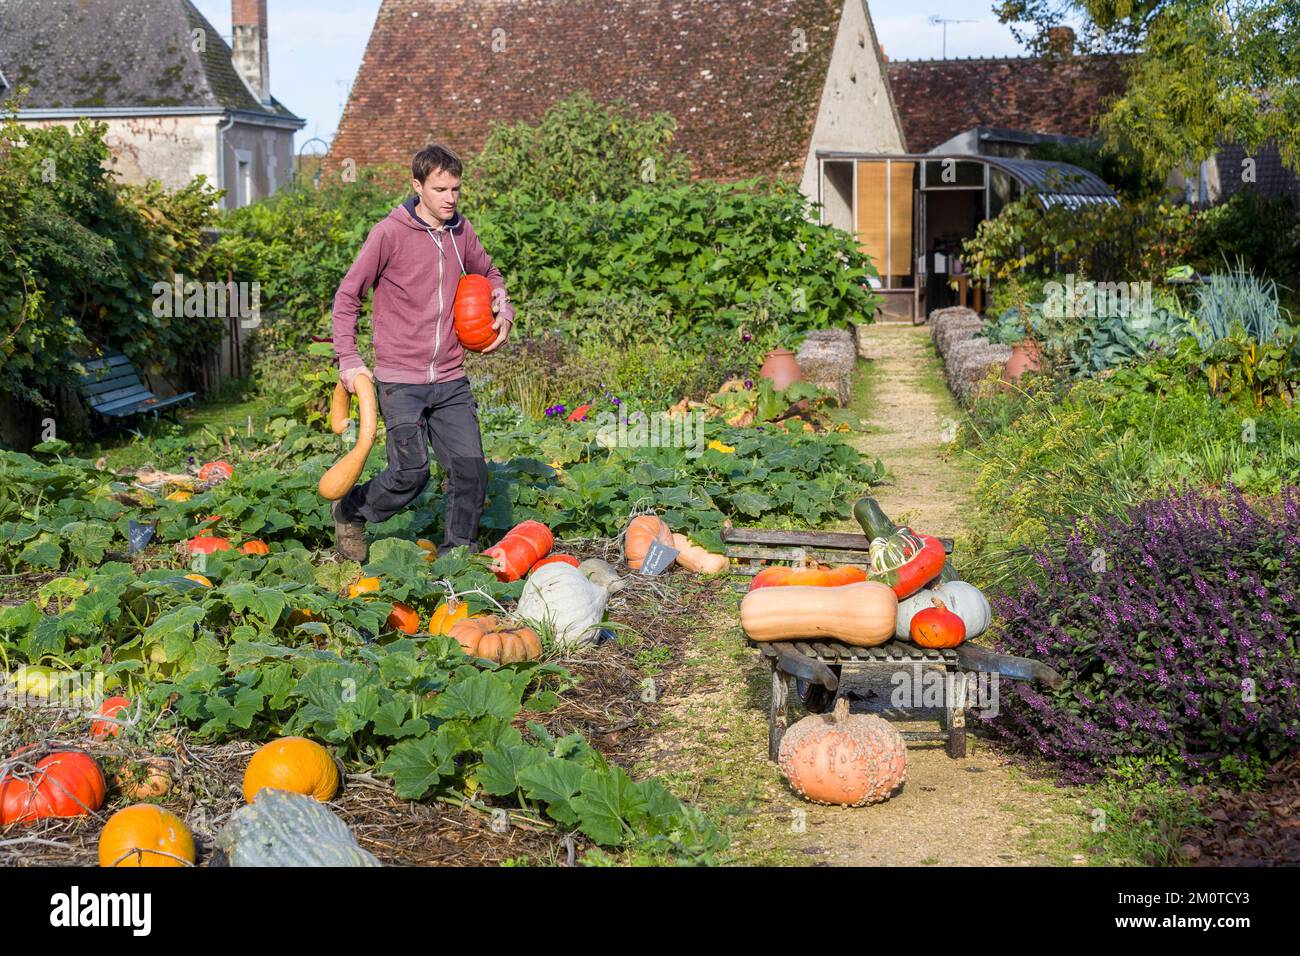 France, Indre et Loire, Ch?digny, village labeled remarkable garden, priest's garden, the presbytery garden brings together several varieties of perennials and annuals decorative medicinal aromatic shrubs and fruit trees, harvesting pumpkin in the vegetable garden by Cl?ment the head gardener Stock Photo